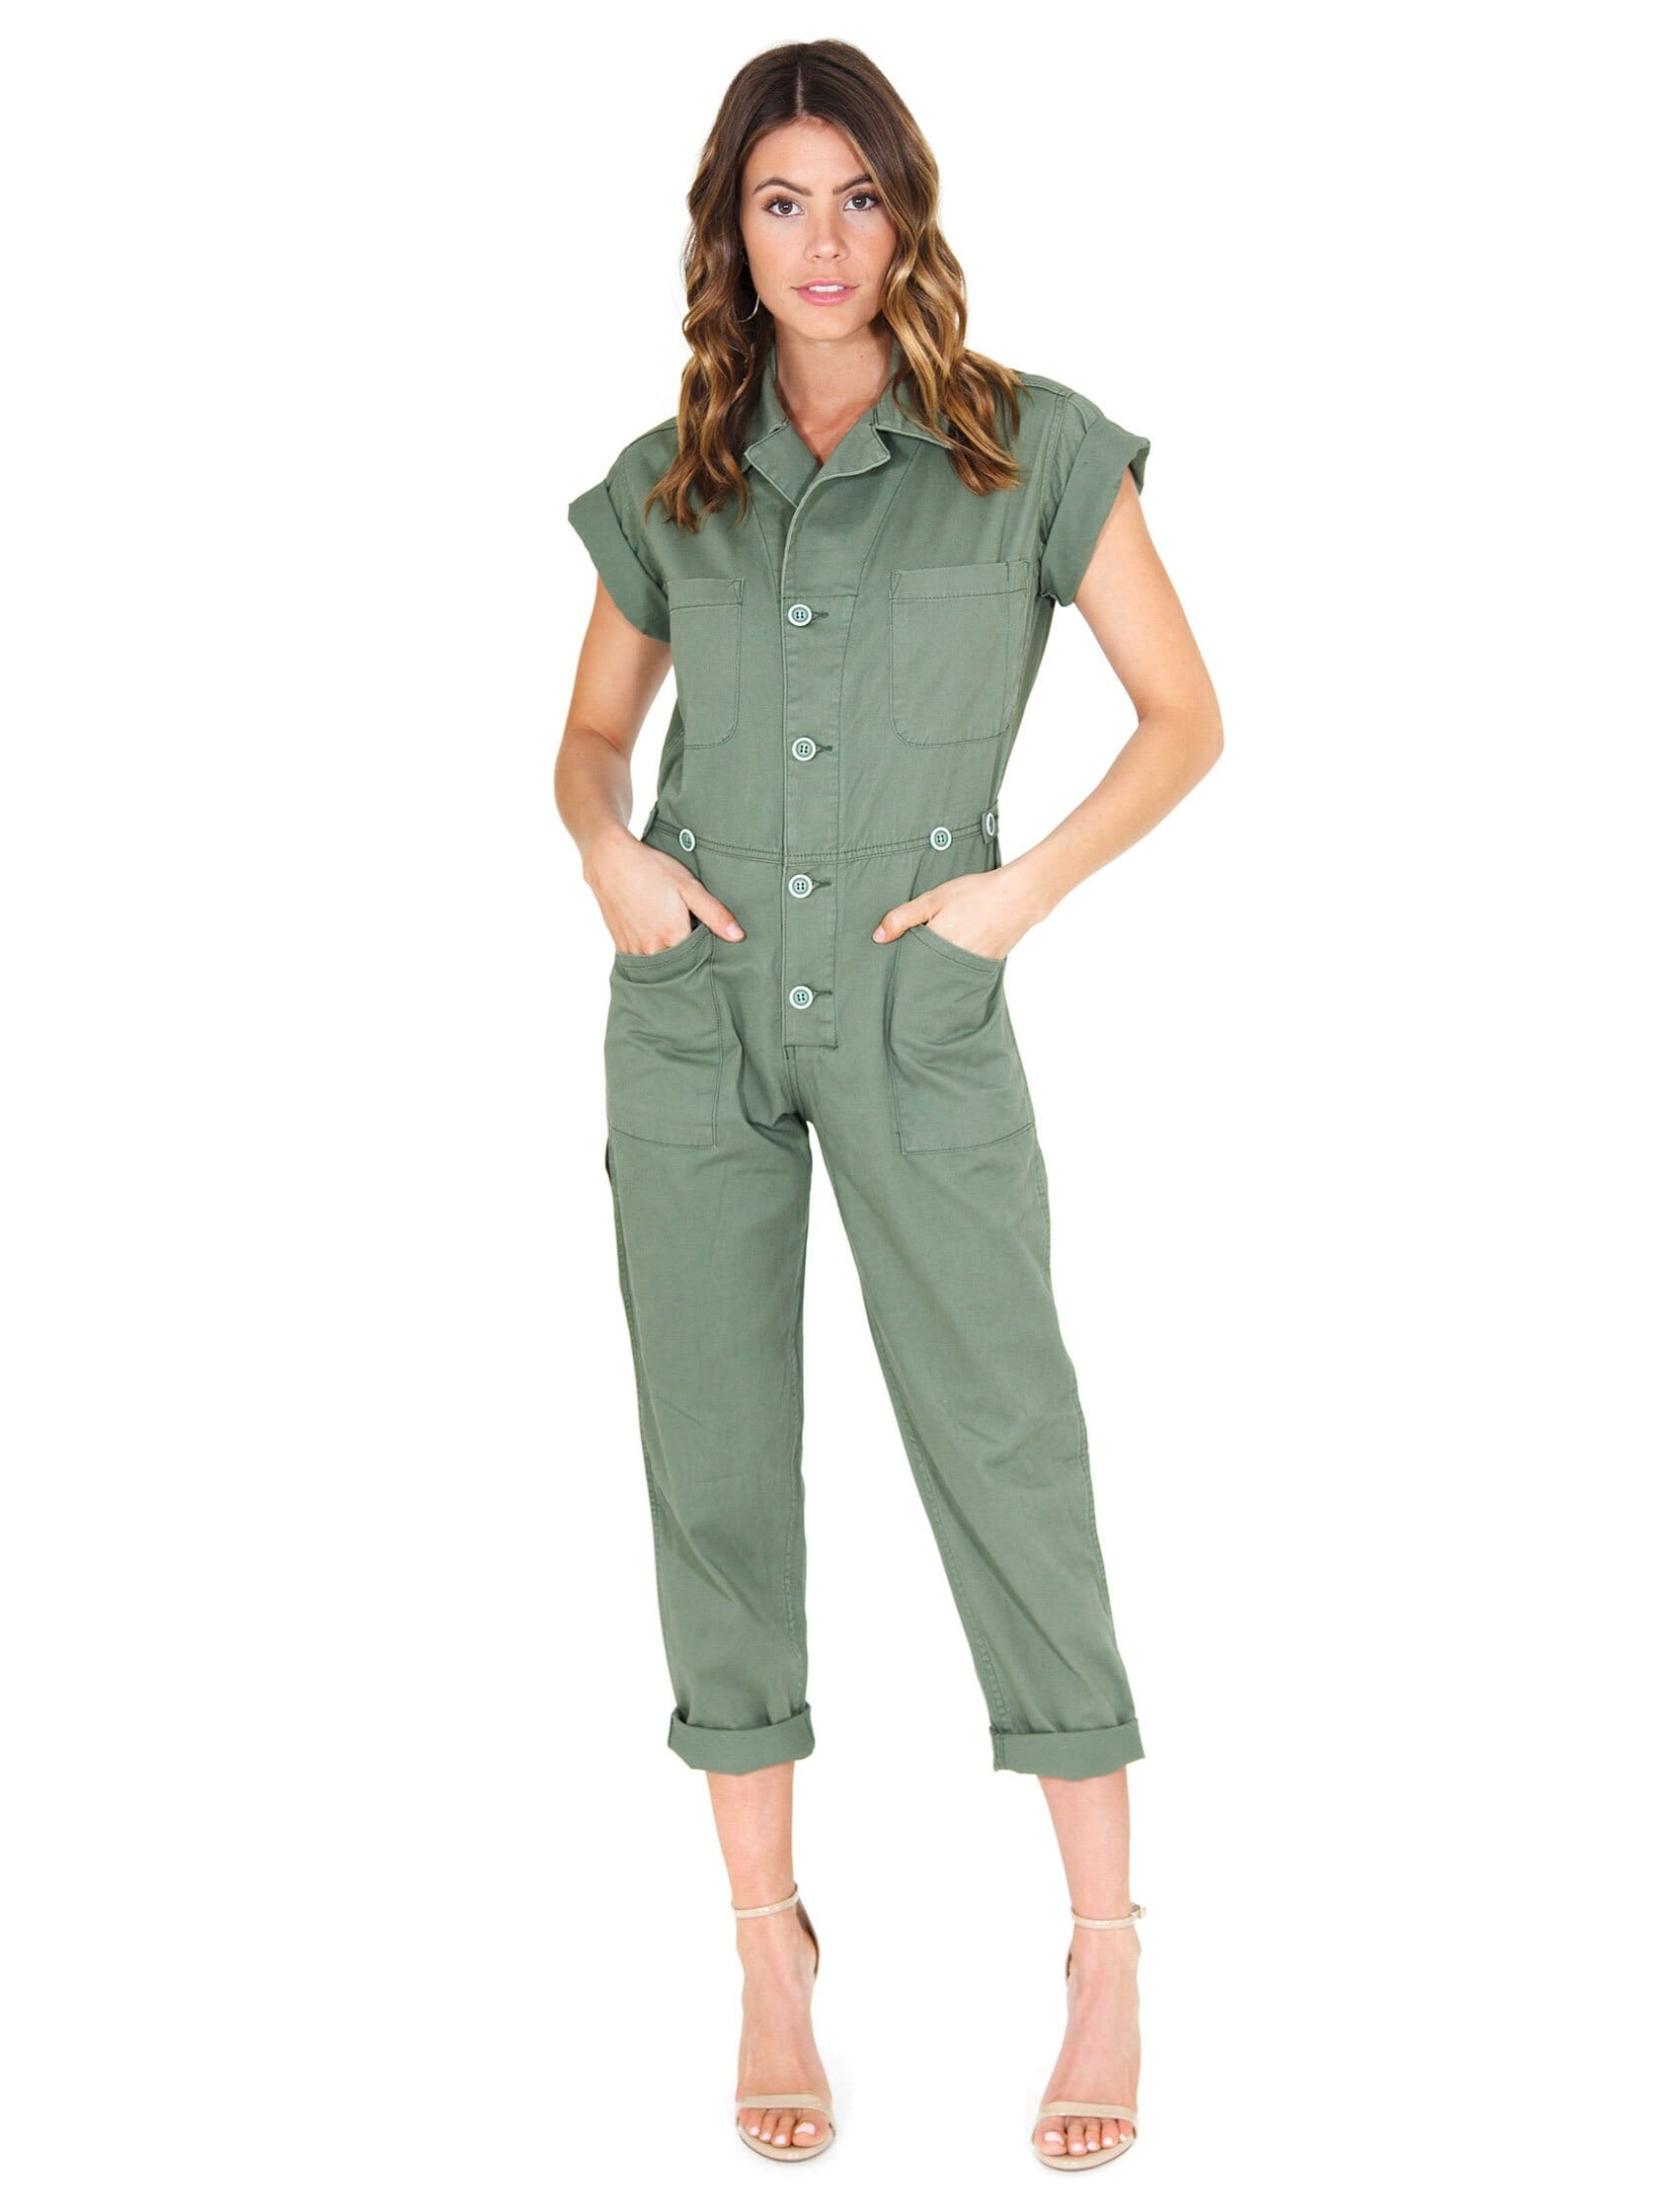 PISTOLA | Grover Jumpsuit in Colonel| FashionPass